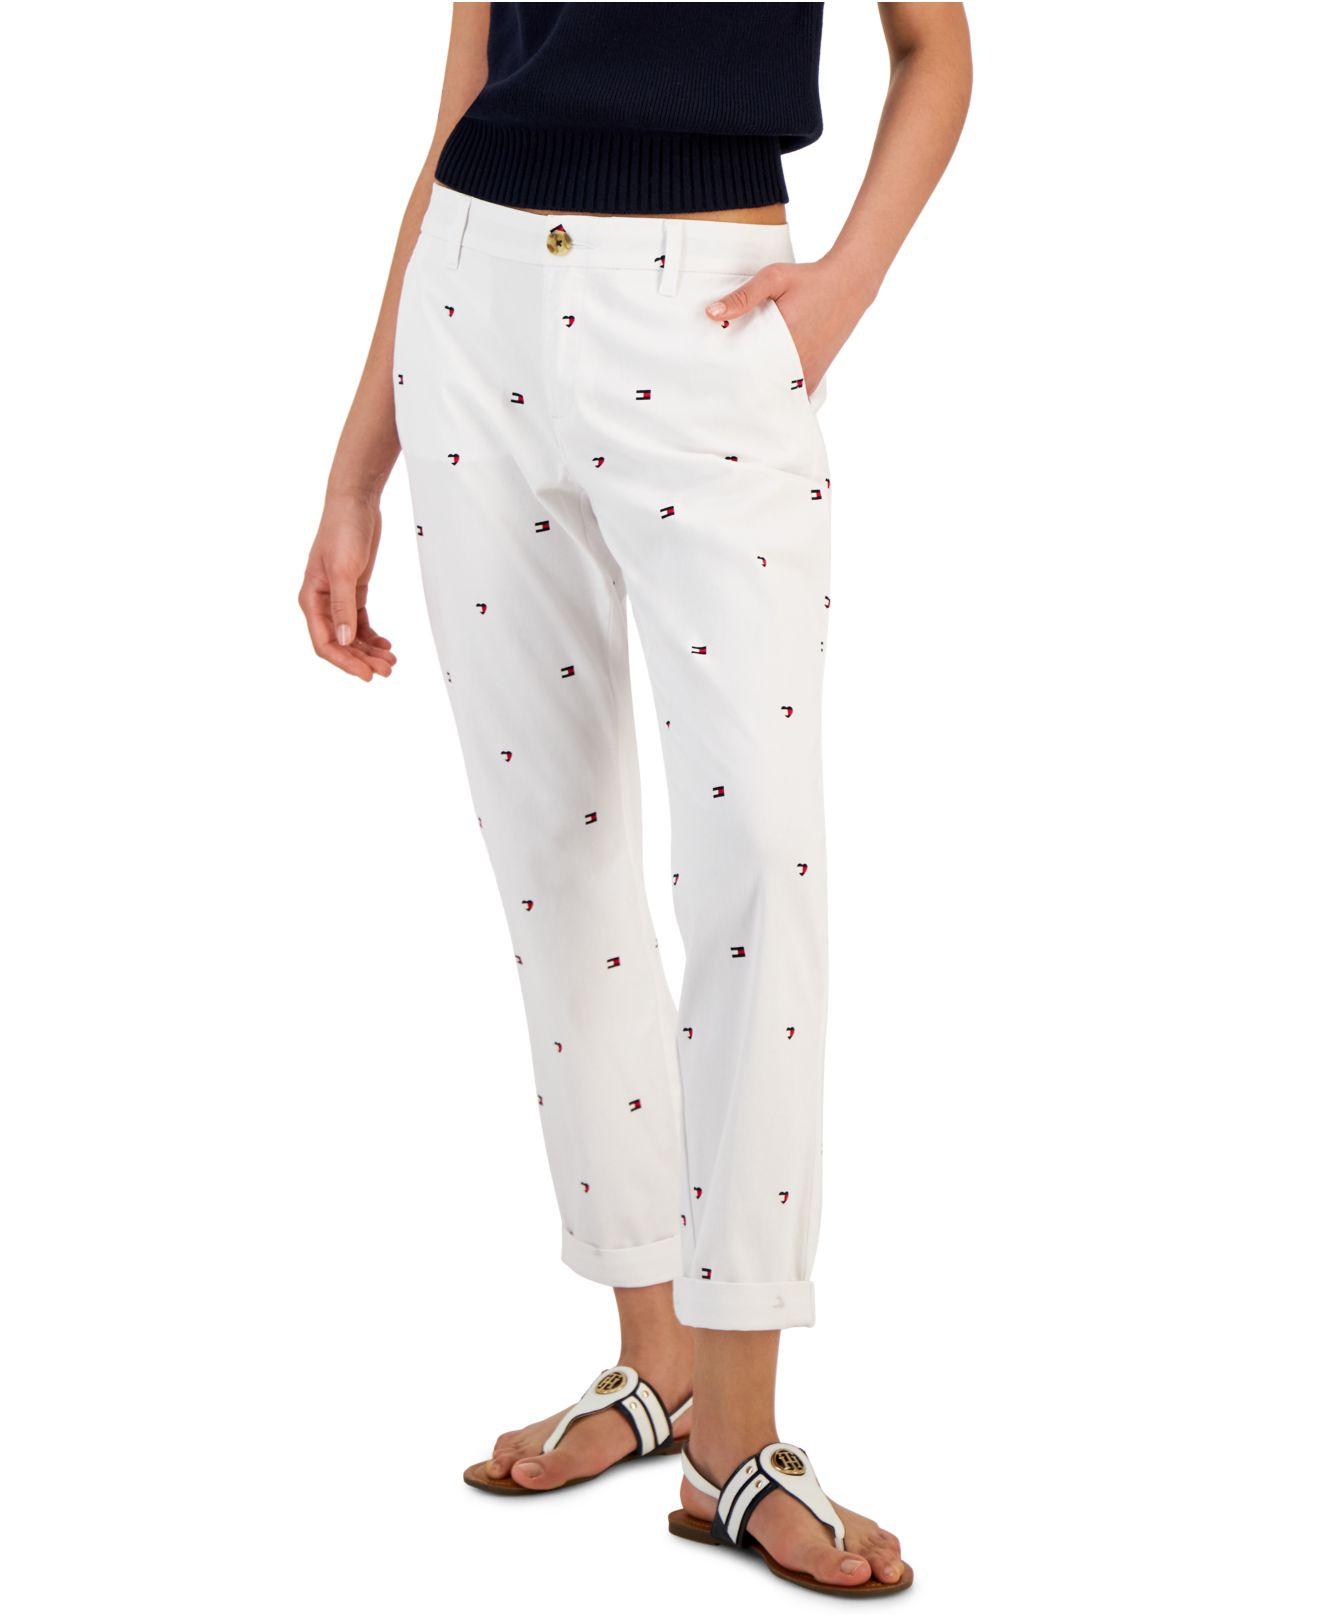 ligegyldighed absurd Adskillelse Tommy Hilfiger Hampton Heart Flag Chino Pants in White | Lyst